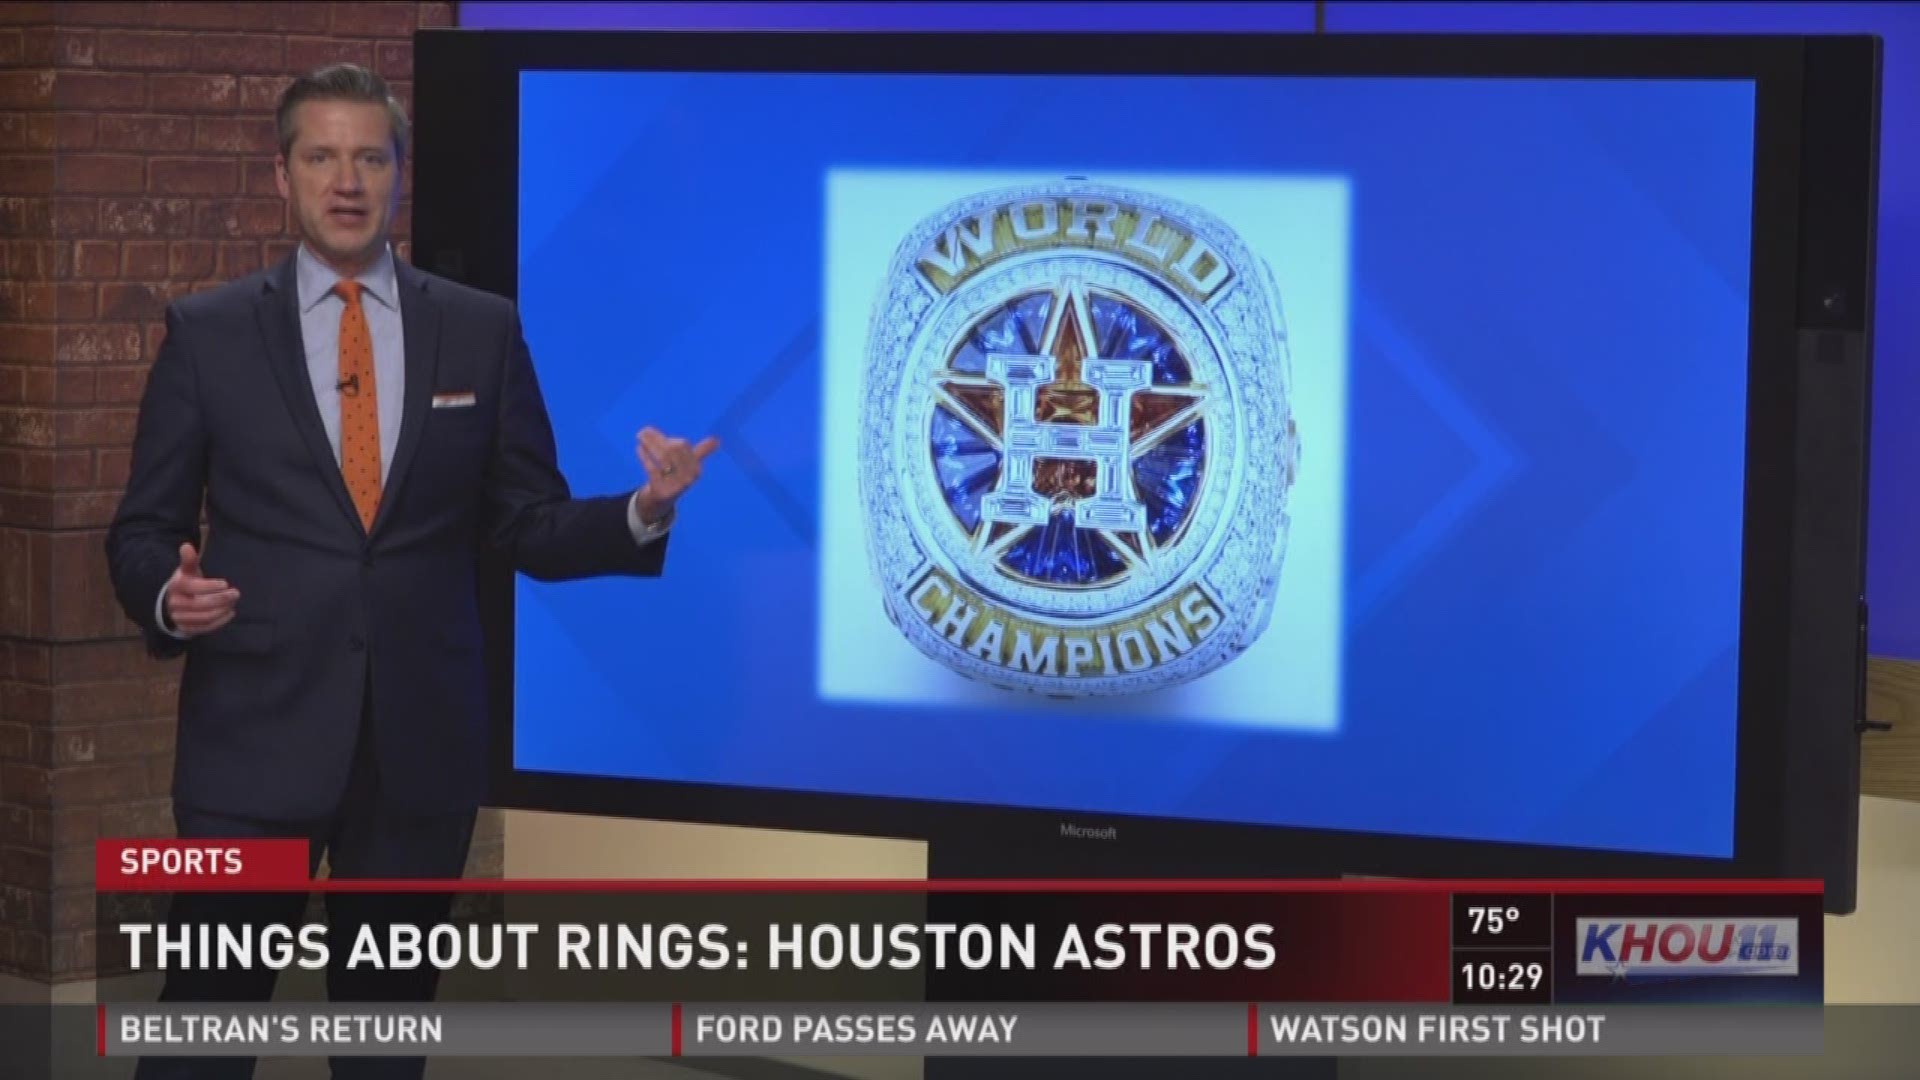 The Houston Astros received their World Series Championship rings Tuesday night -- some unique pieces of history custom-made by Texas jeweler Jostens.